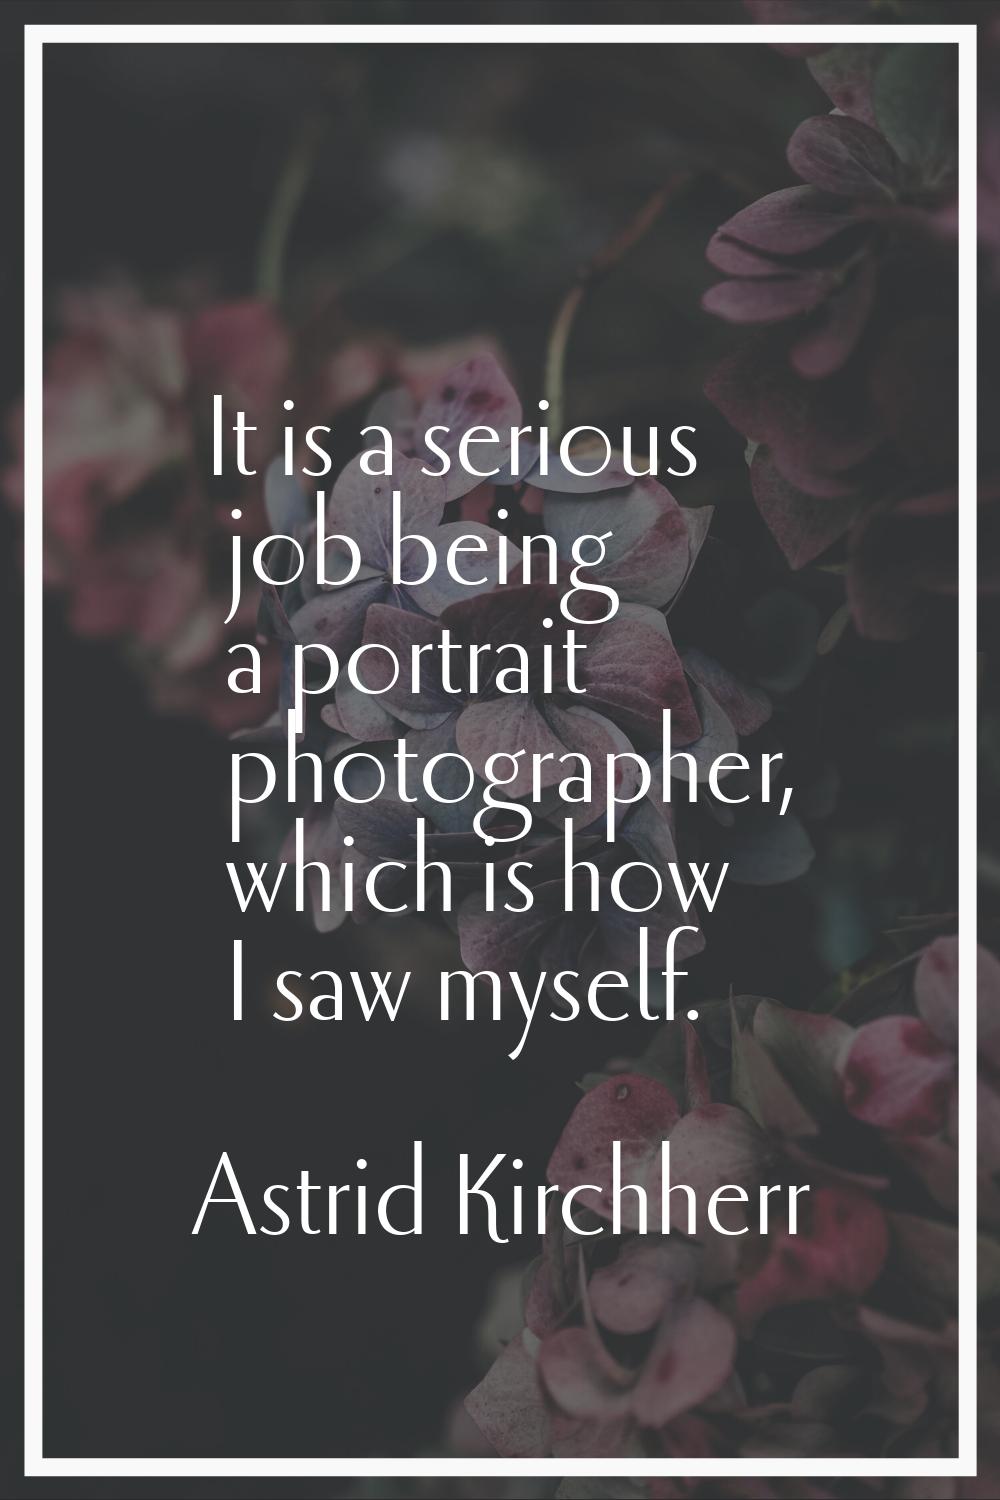 It is a serious job being a portrait photographer, which is how I saw myself.